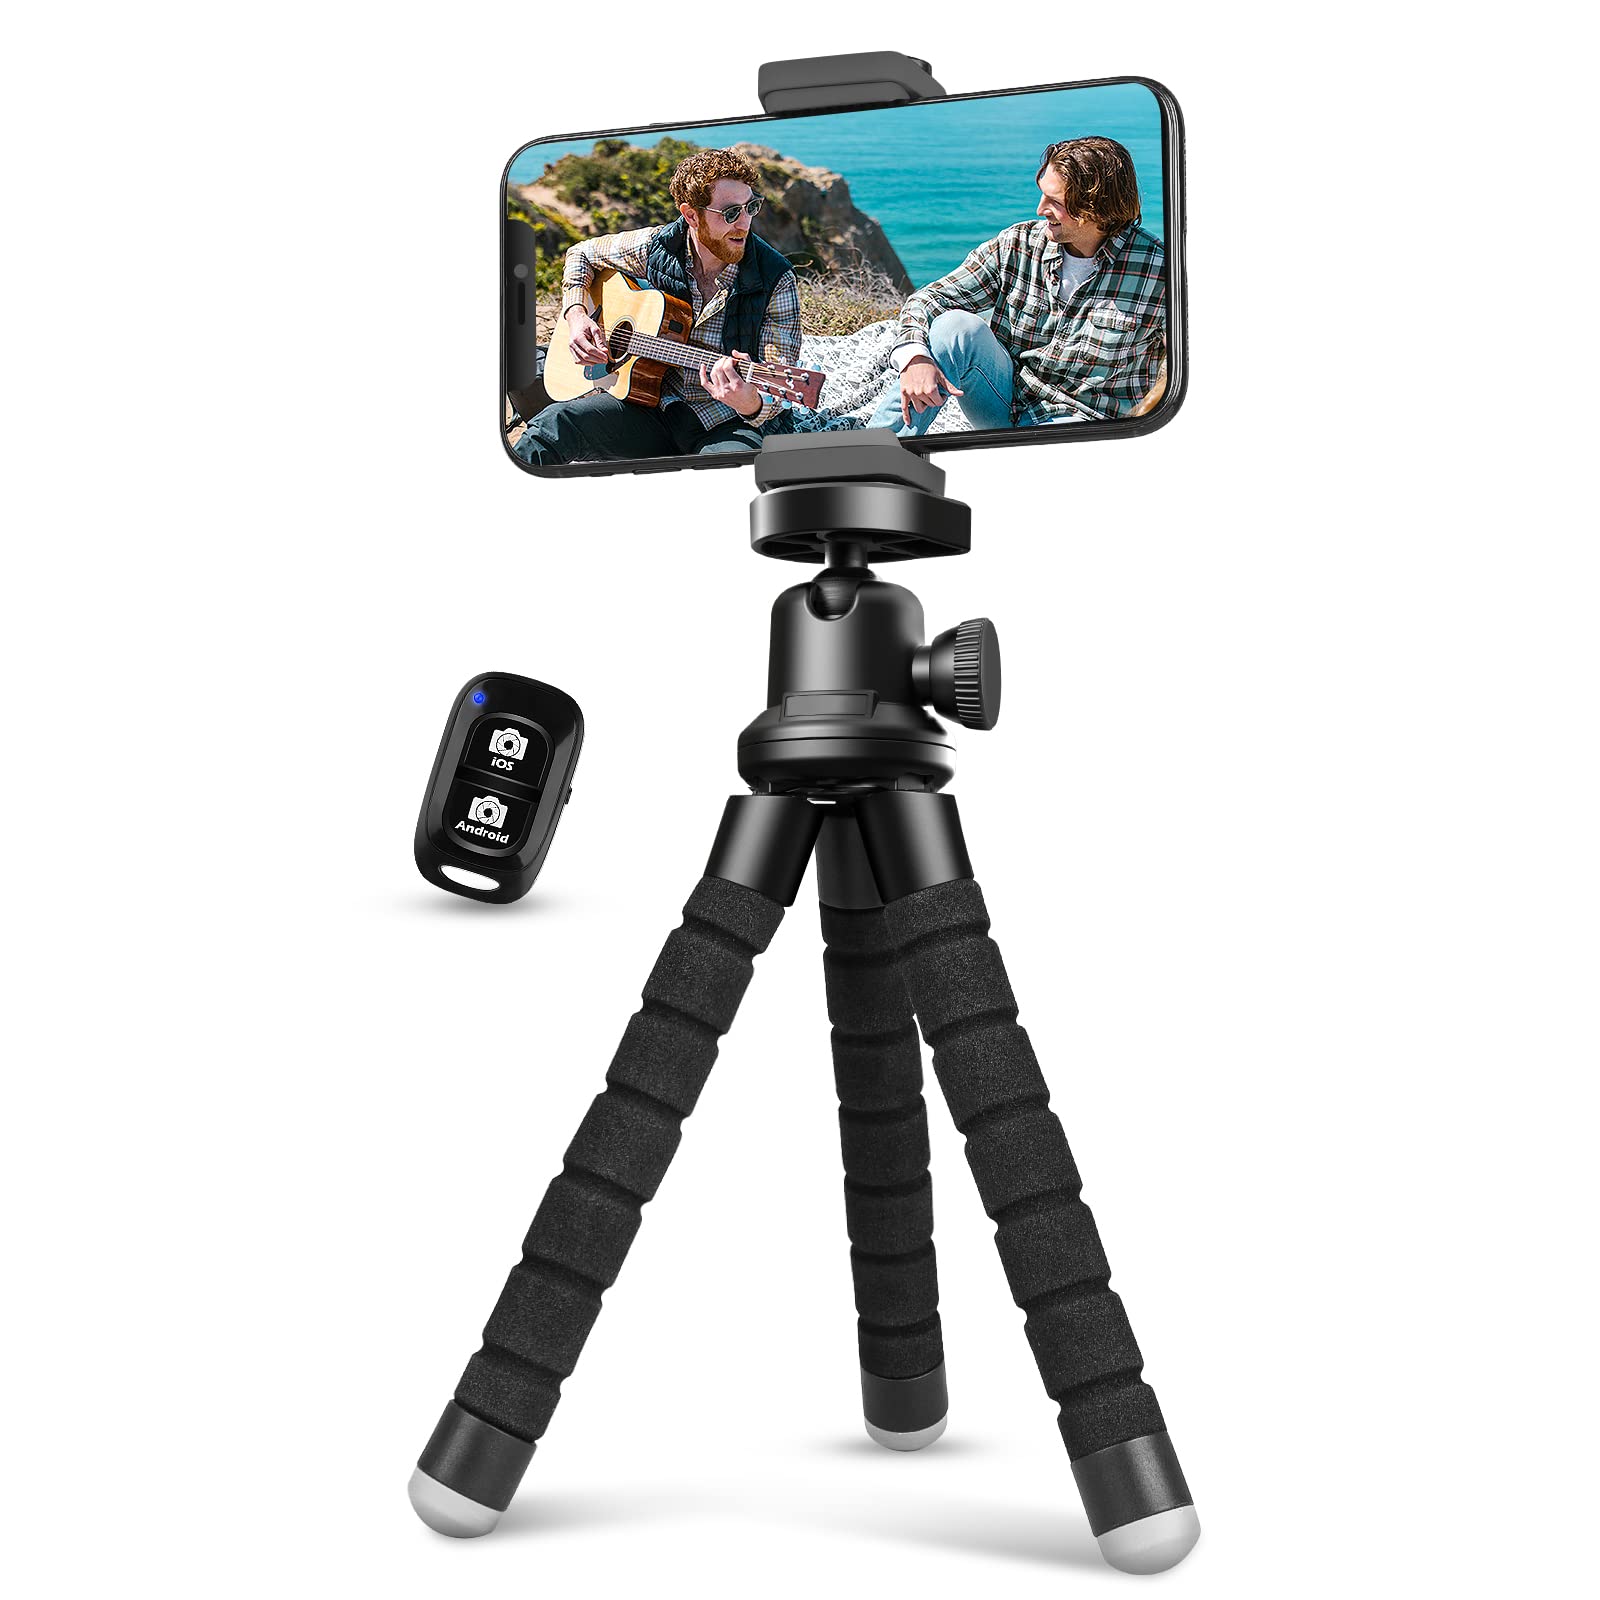 Aureday Phone Tripod, Flexible Small Tripod for iPhone and Android Cell Phone 